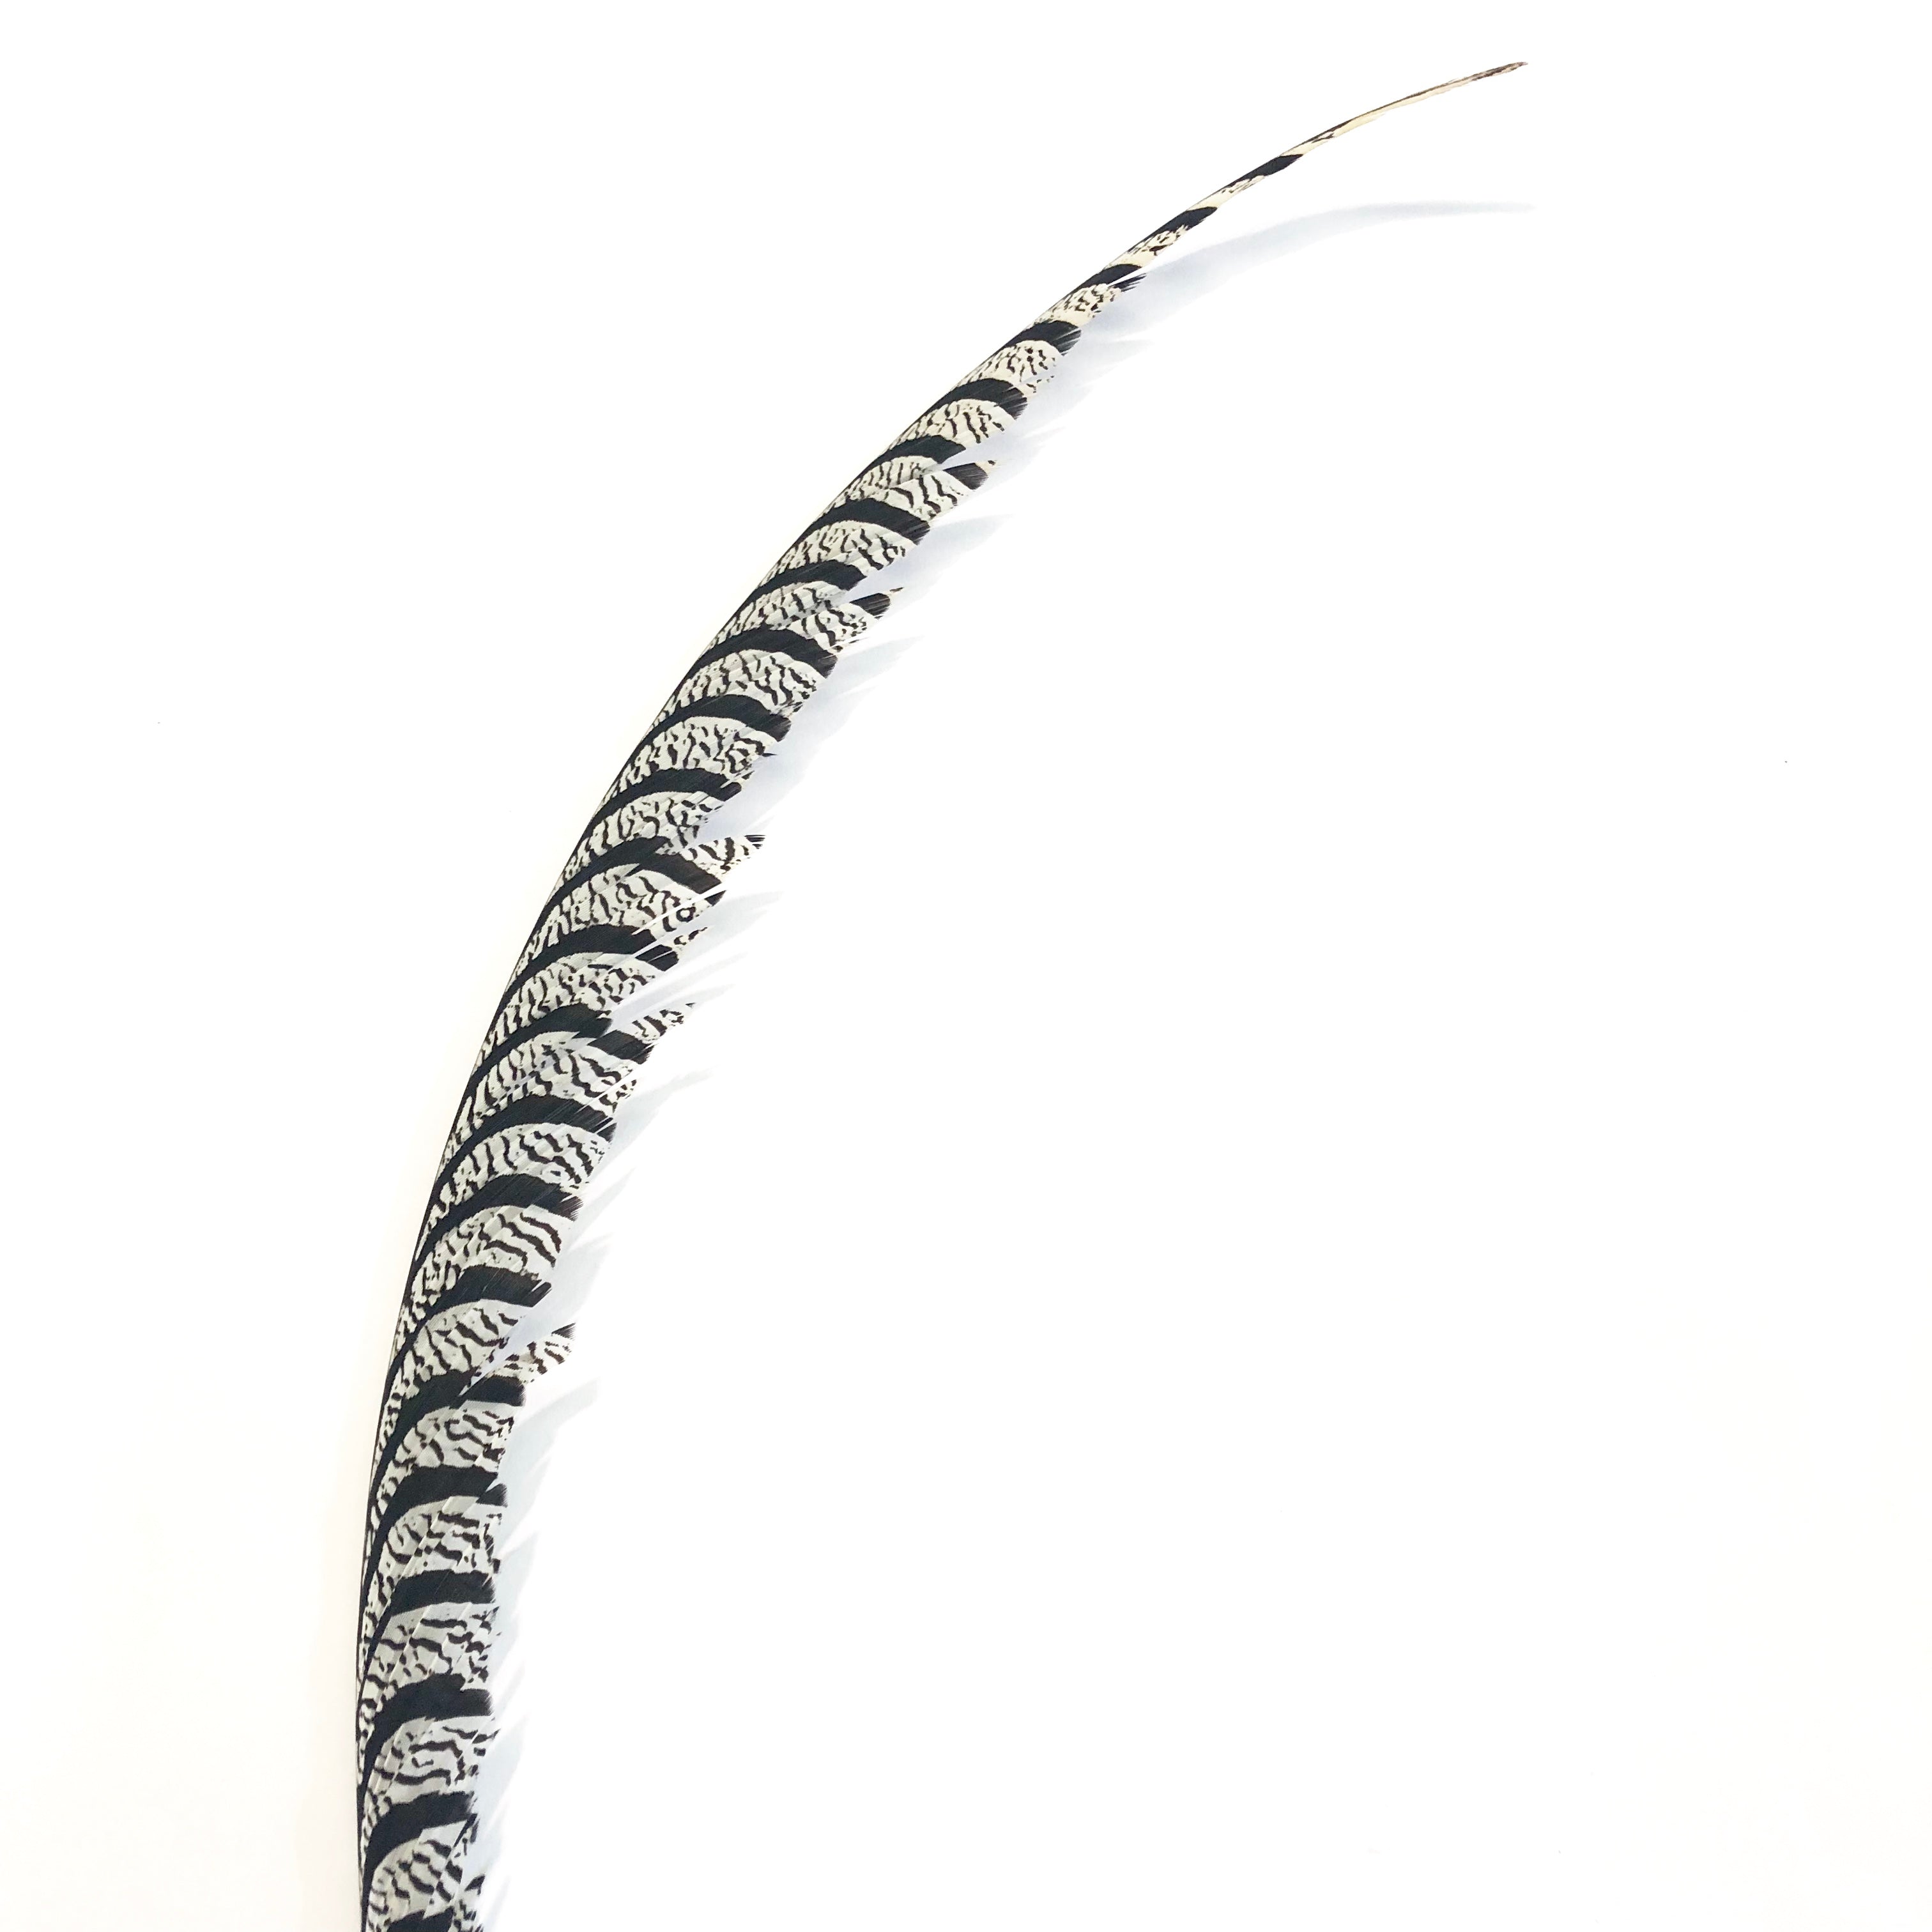 Lady Amherst Pheasant Centre Tail Feather - Natural